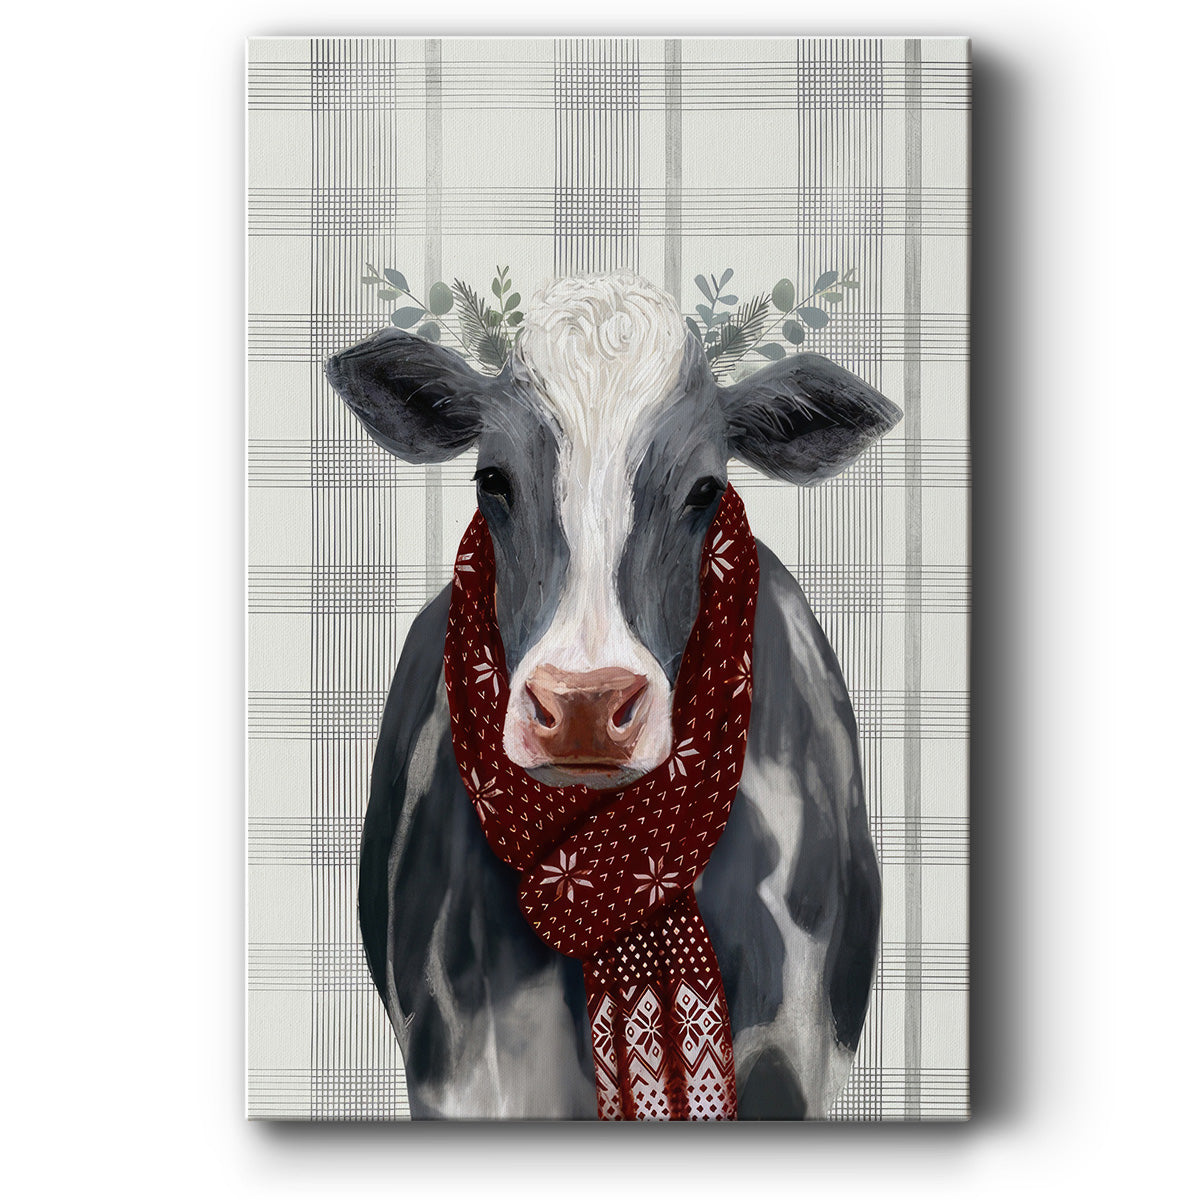 Yuletide Cow II - Gallery Wrapped Canvas